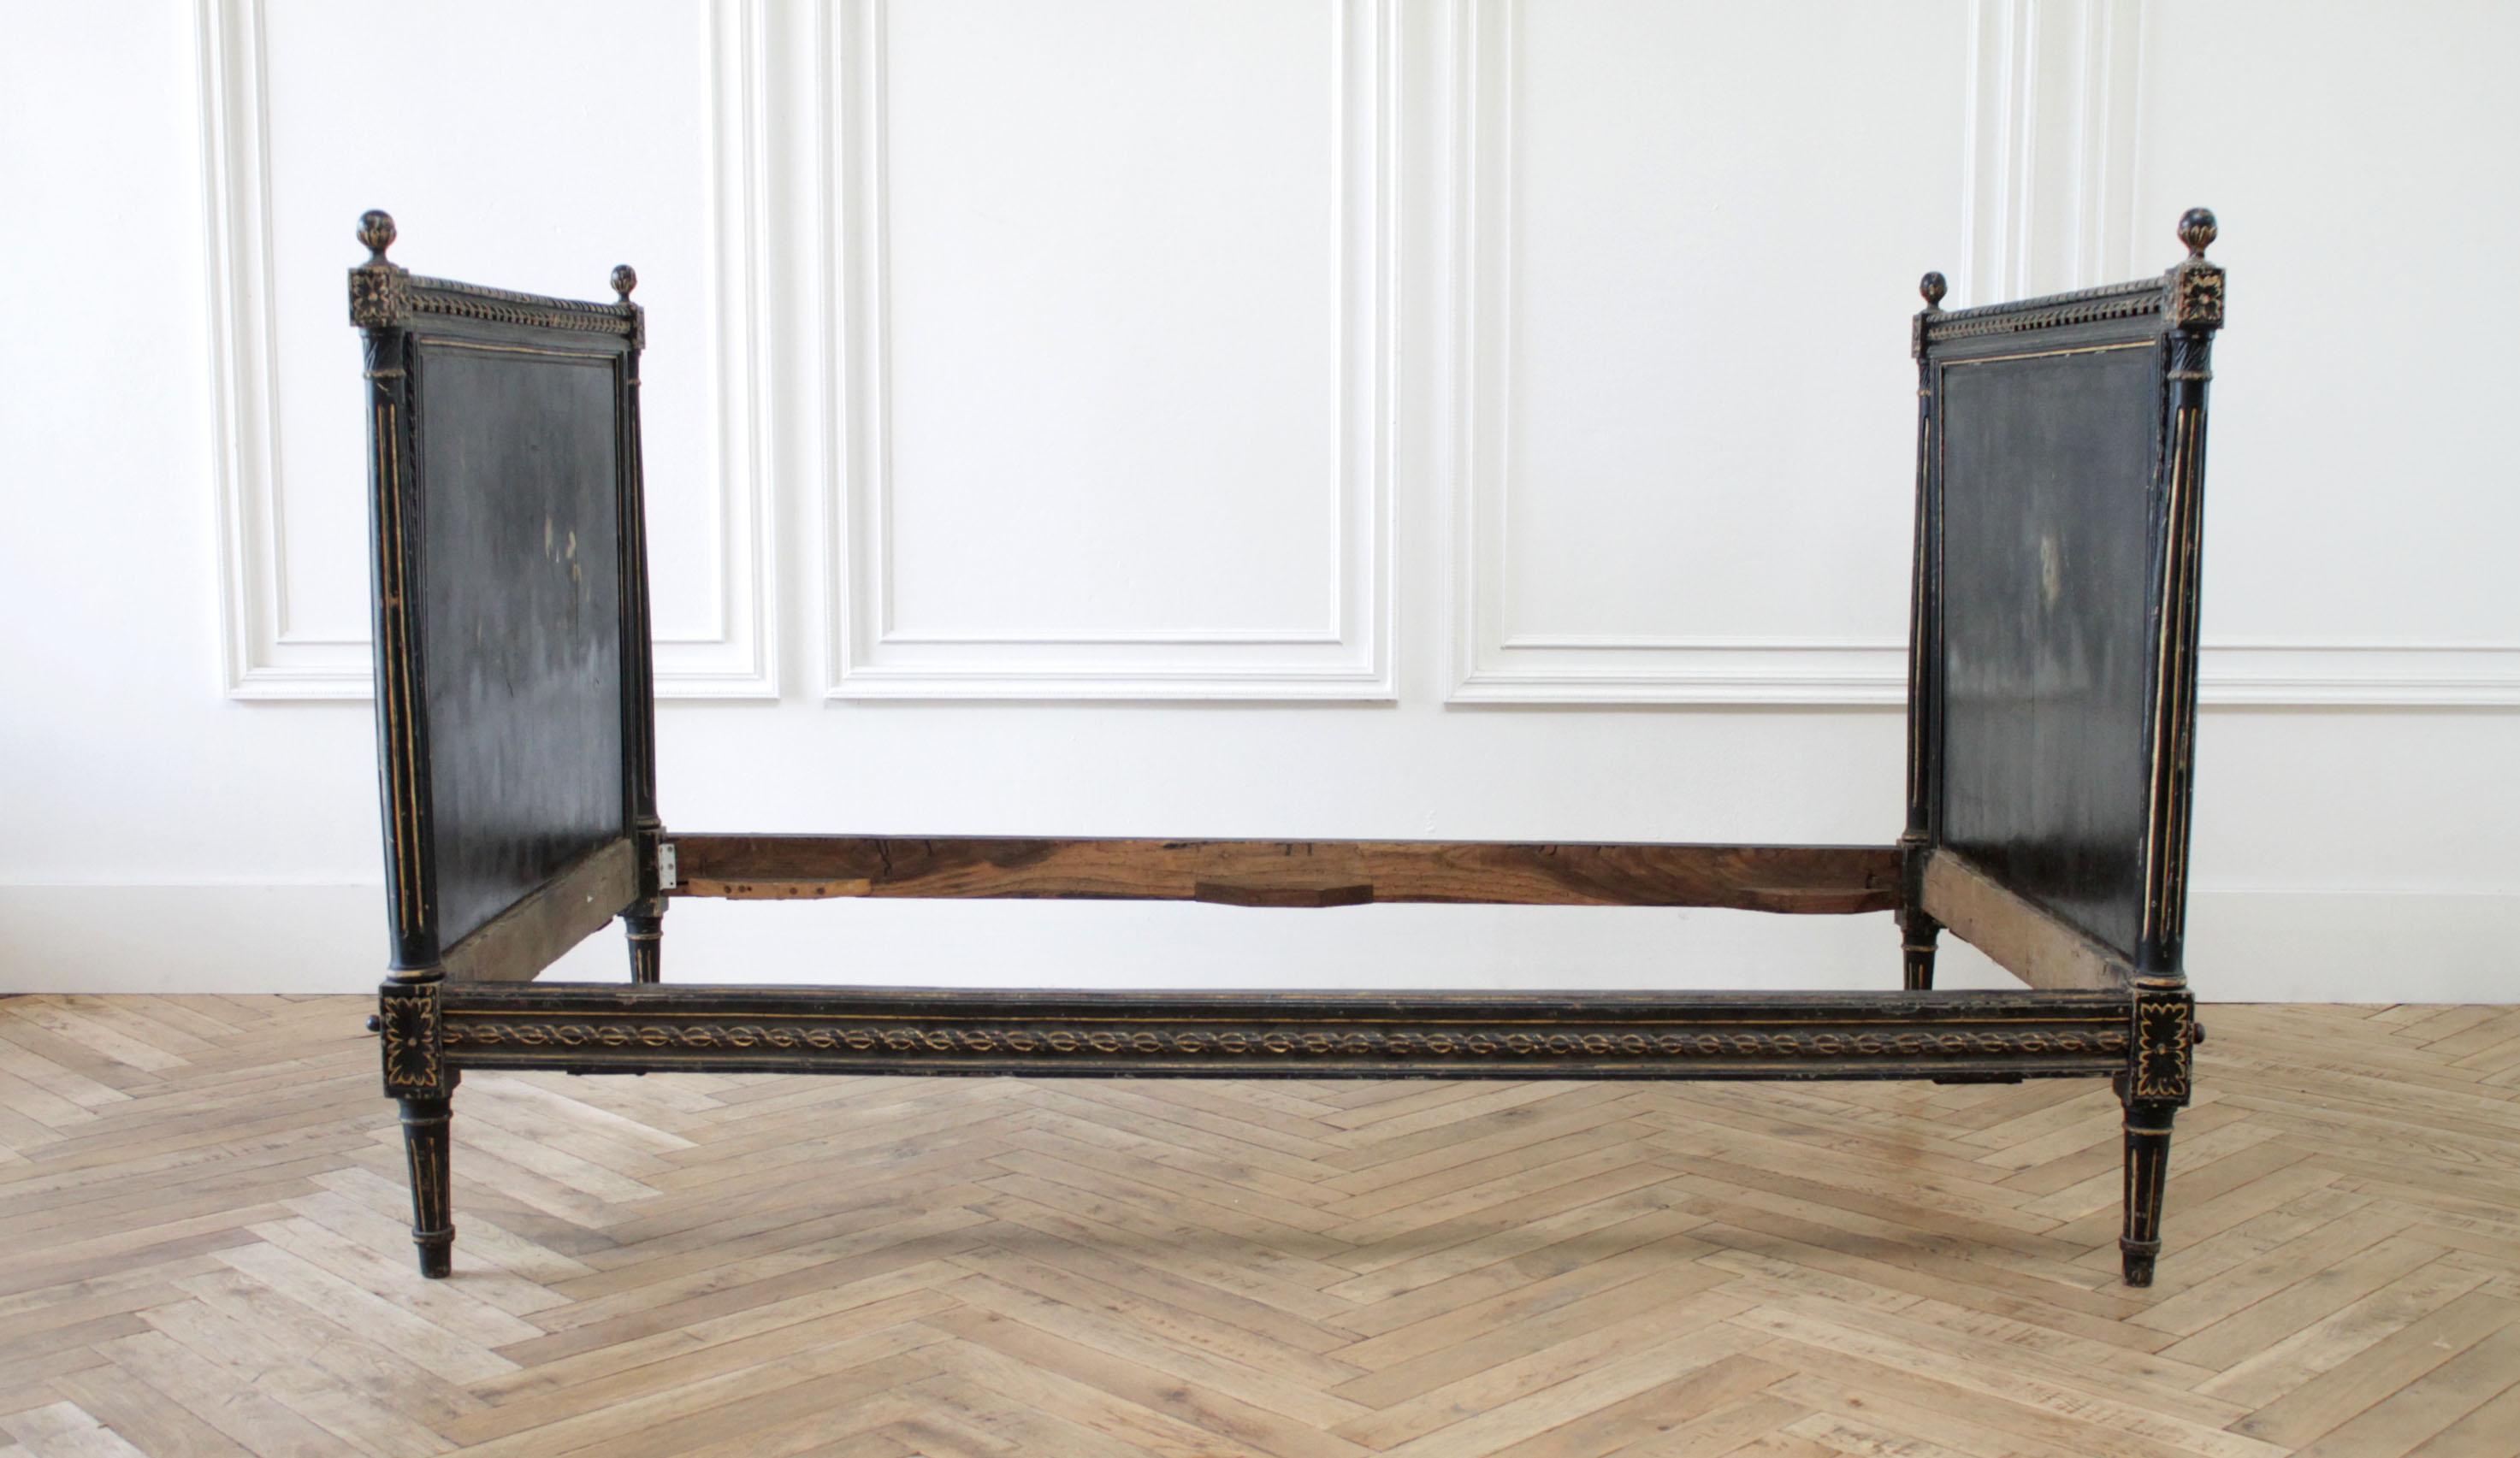 Antique Louis XVI style painted French daybed
Original black paint with faded and distressed patina. Original rails, one rail is a decorative rail with carvings that would be showing and the other is a plain rails which would've been placed against